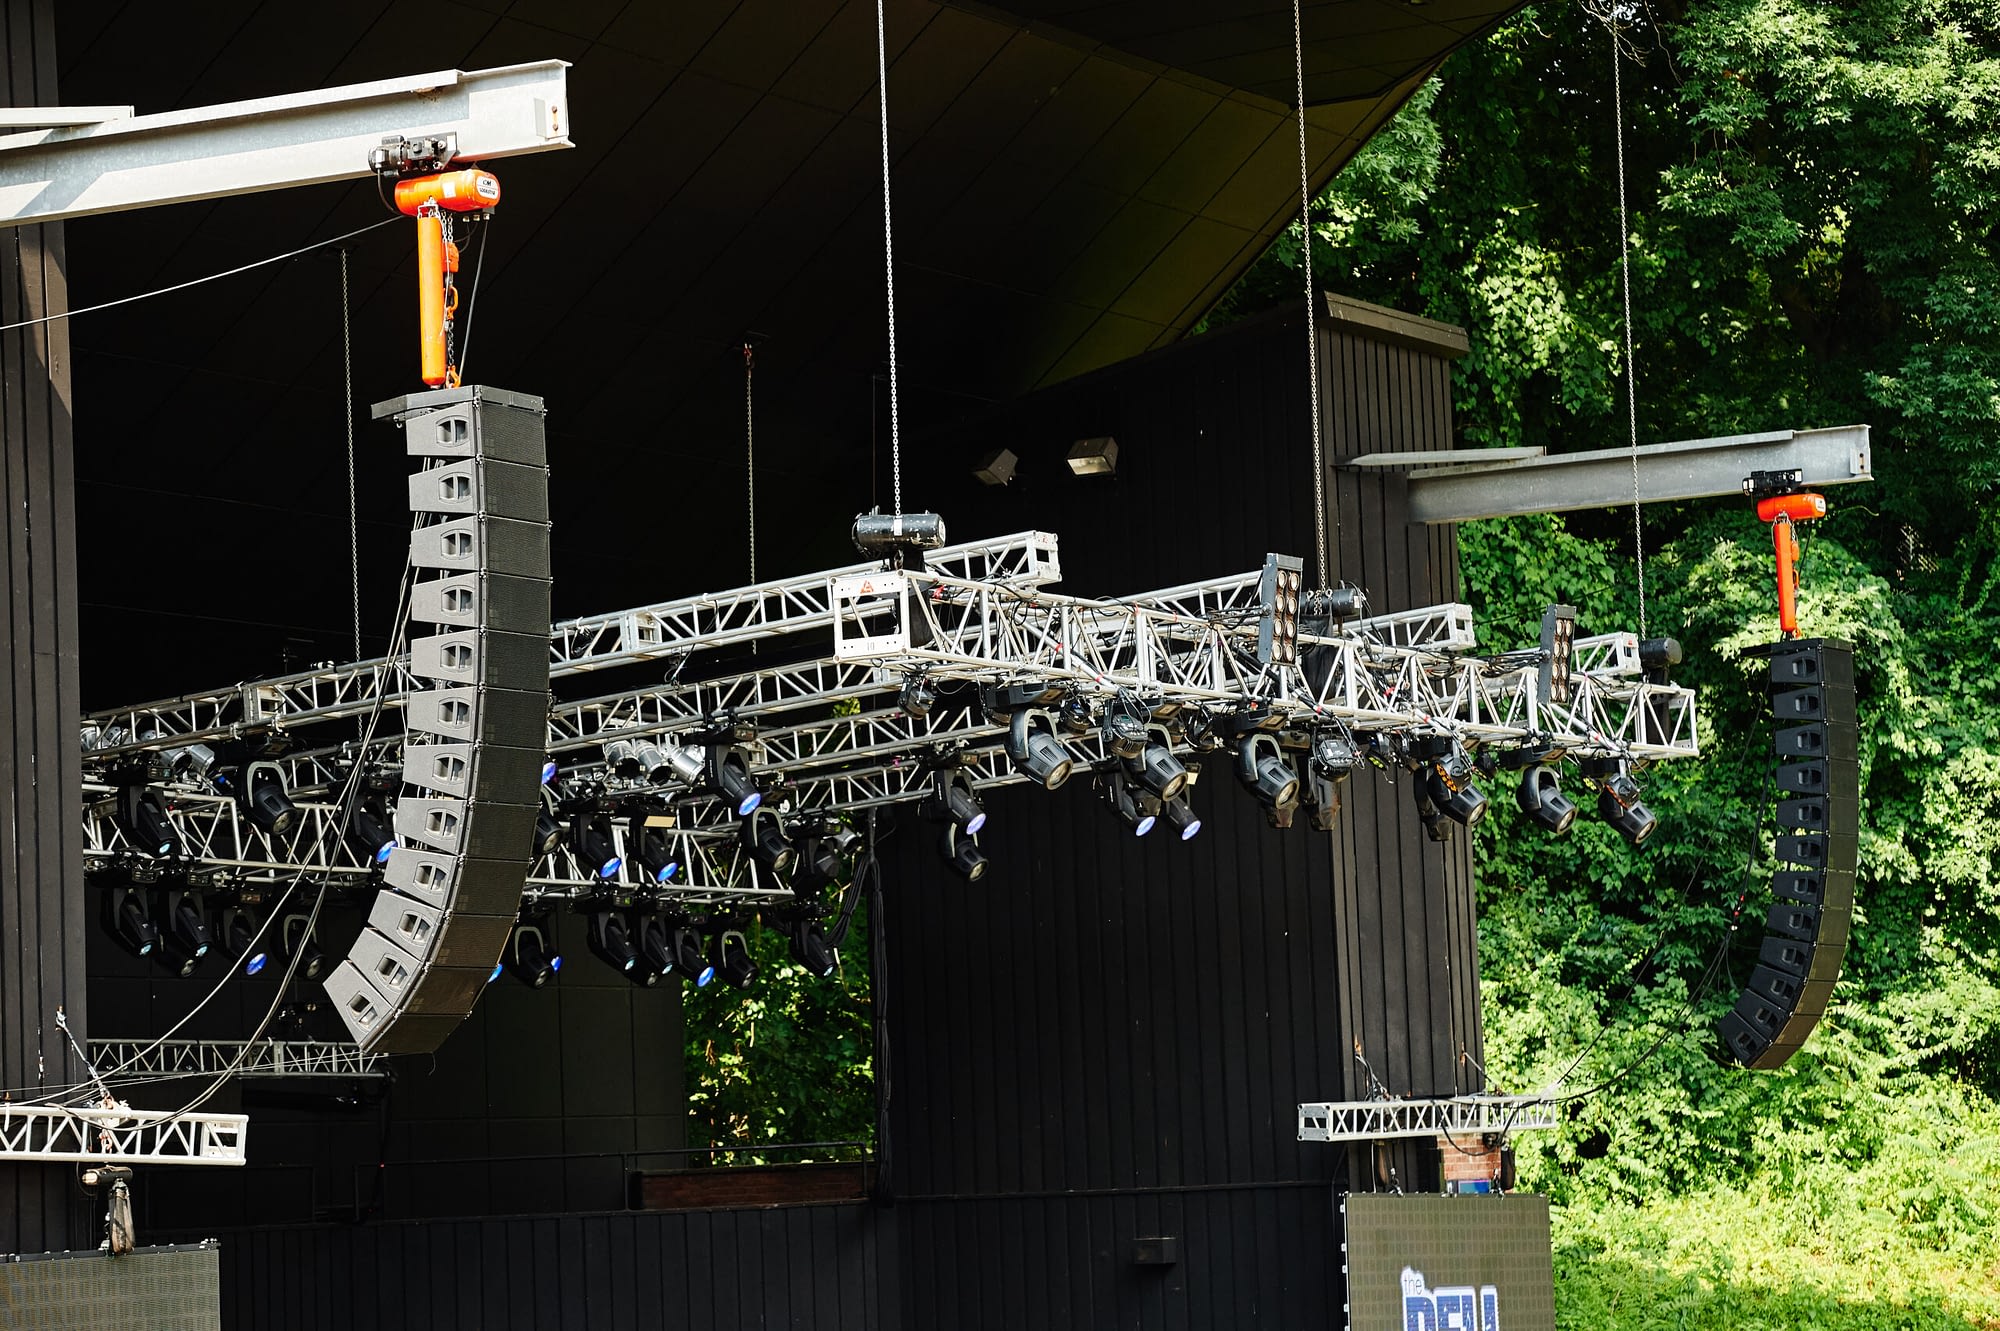 Concert Sound Systems With D&b Audiotechnik